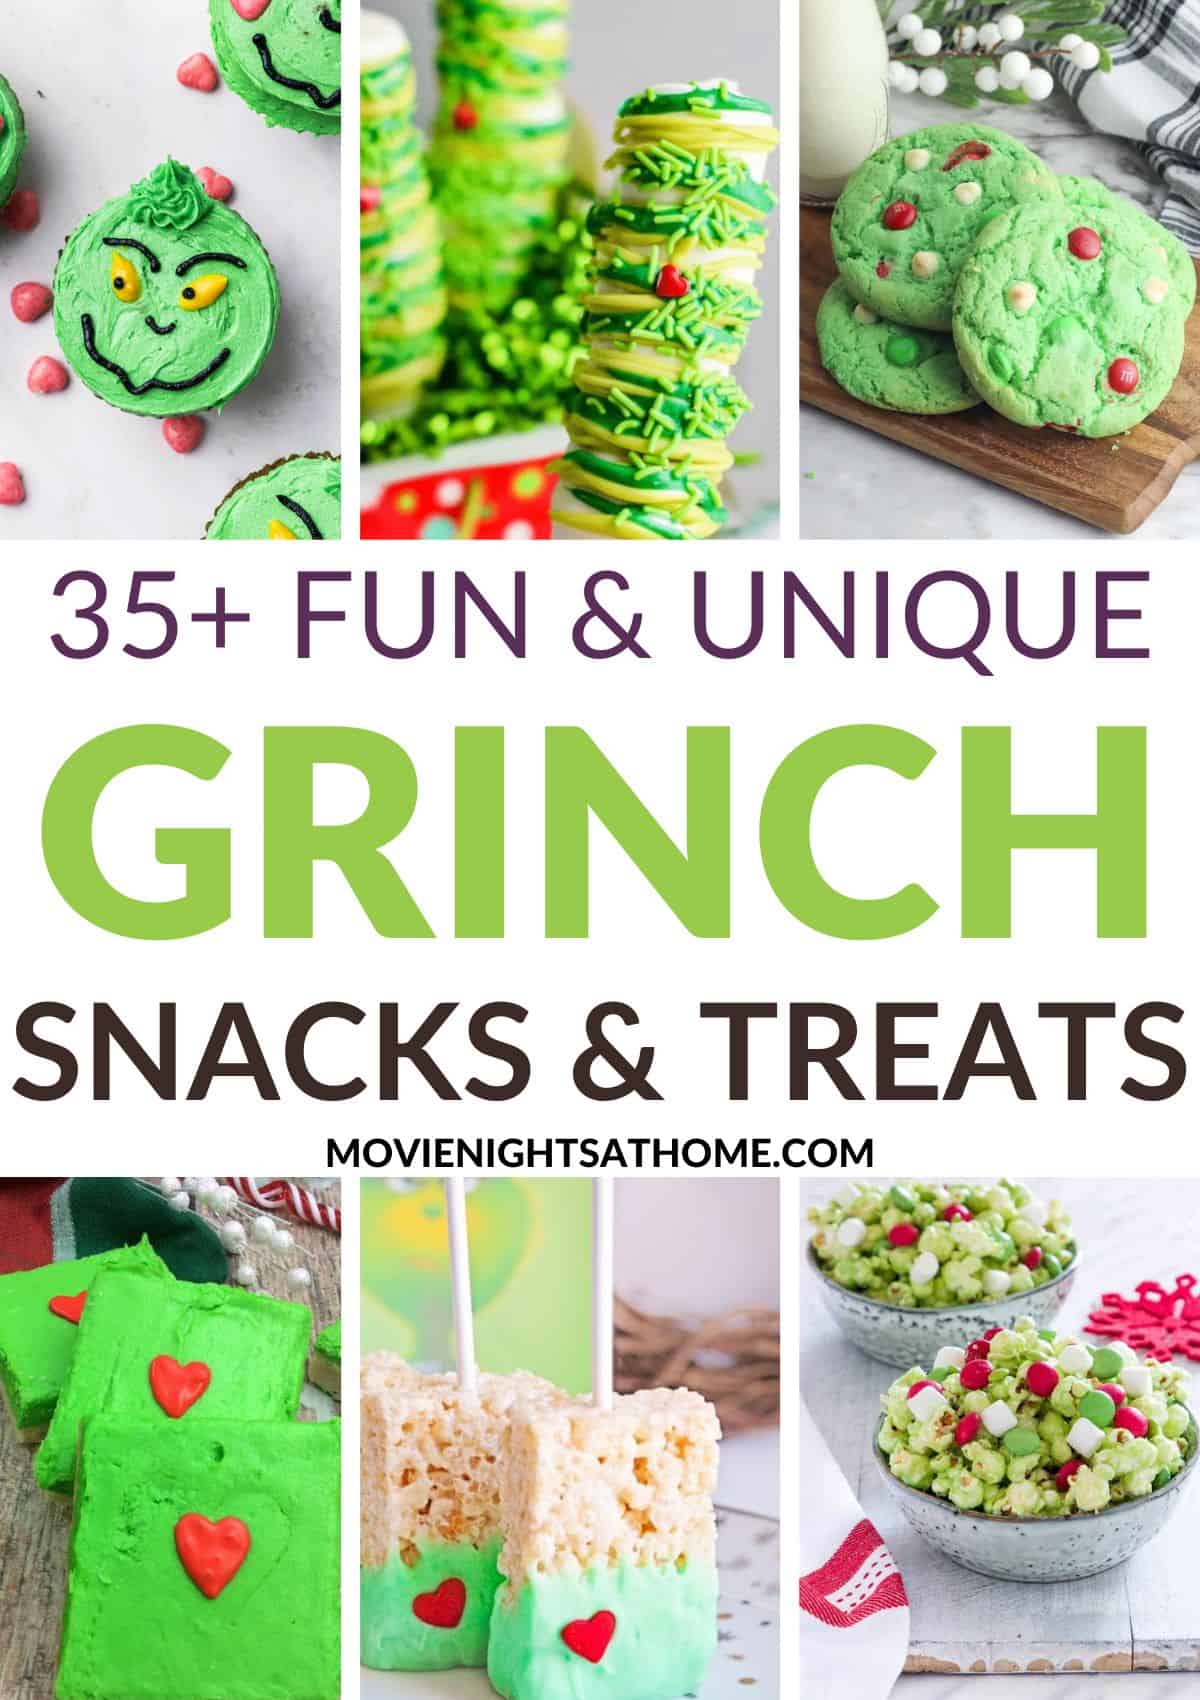 collage of 6 of the Grinch Snack Ideas including cupcakes, marshmallow pops, cookies, cookie bars, rice krispies, and popcorn